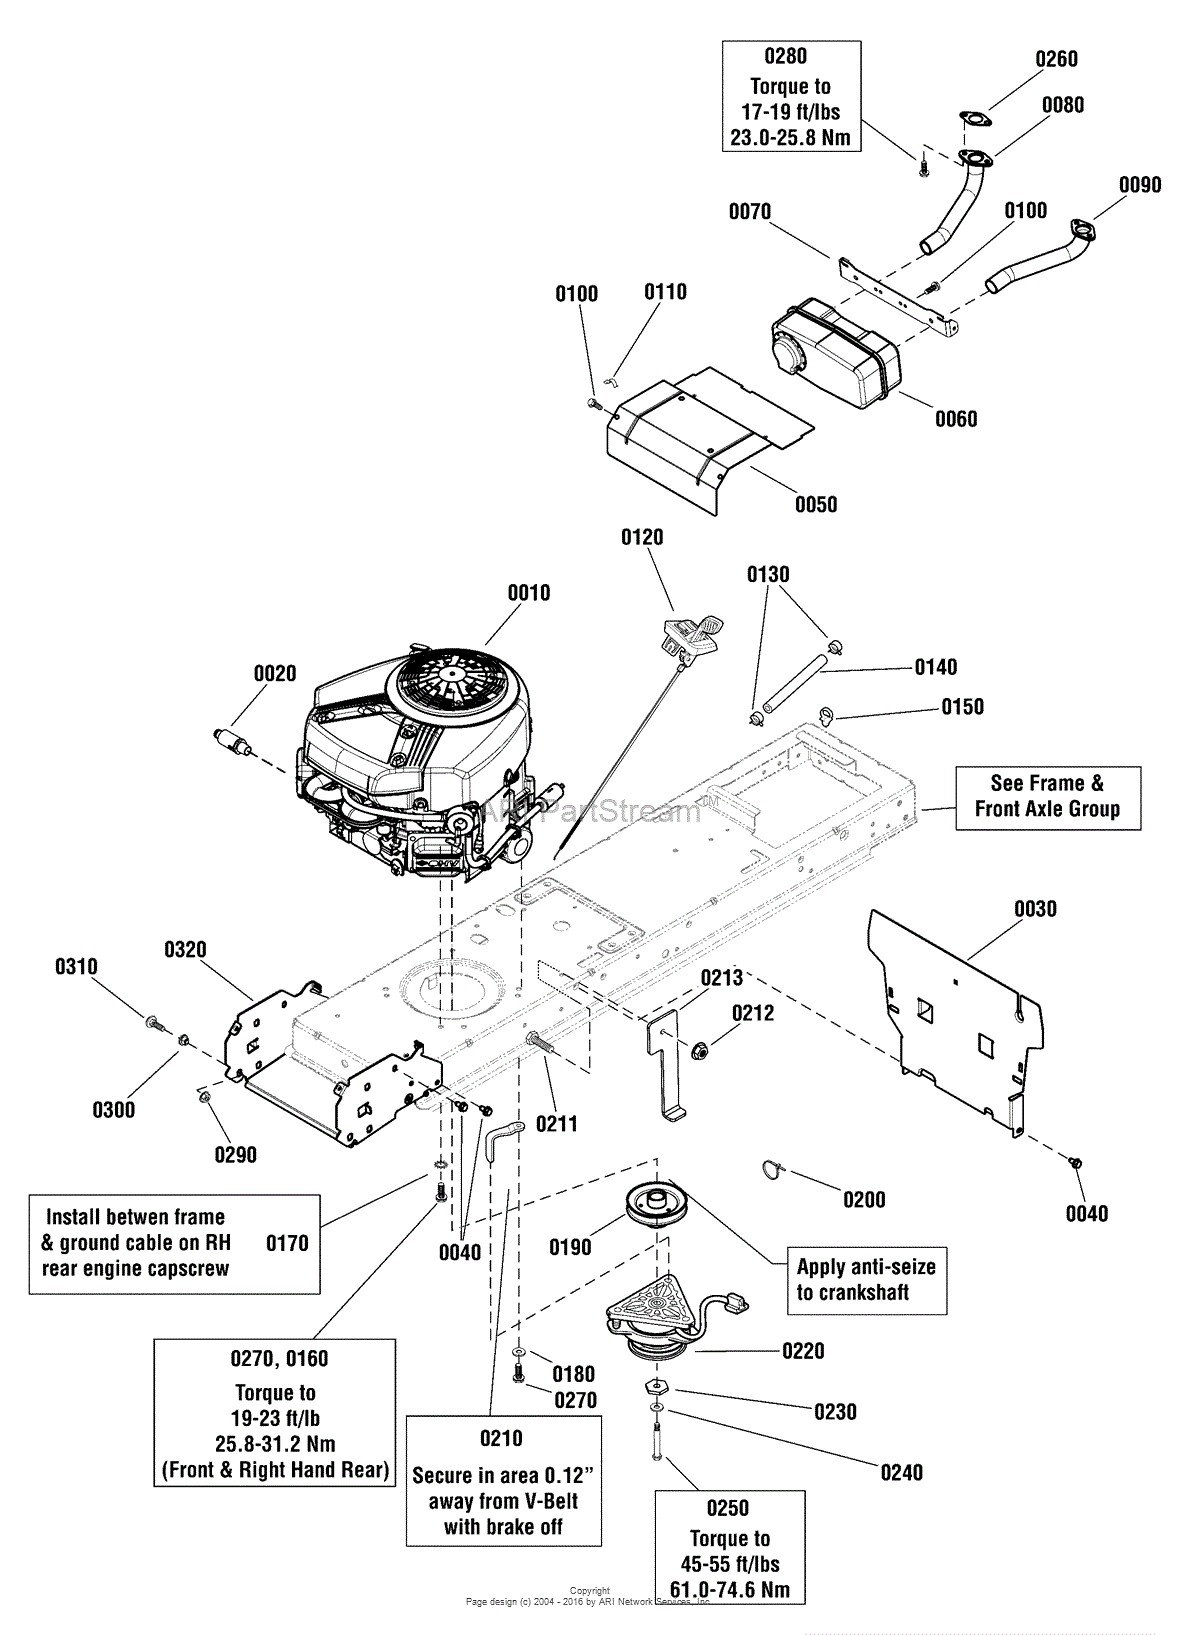 Briggs and Stratton Lawn Mower Engine Parts Diagram Snapper 00 Spx2348 48" 122cm 23 Hp Spx Lawn Tractor 300 Of Briggs and Stratton Lawn Mower Engine Parts Diagram